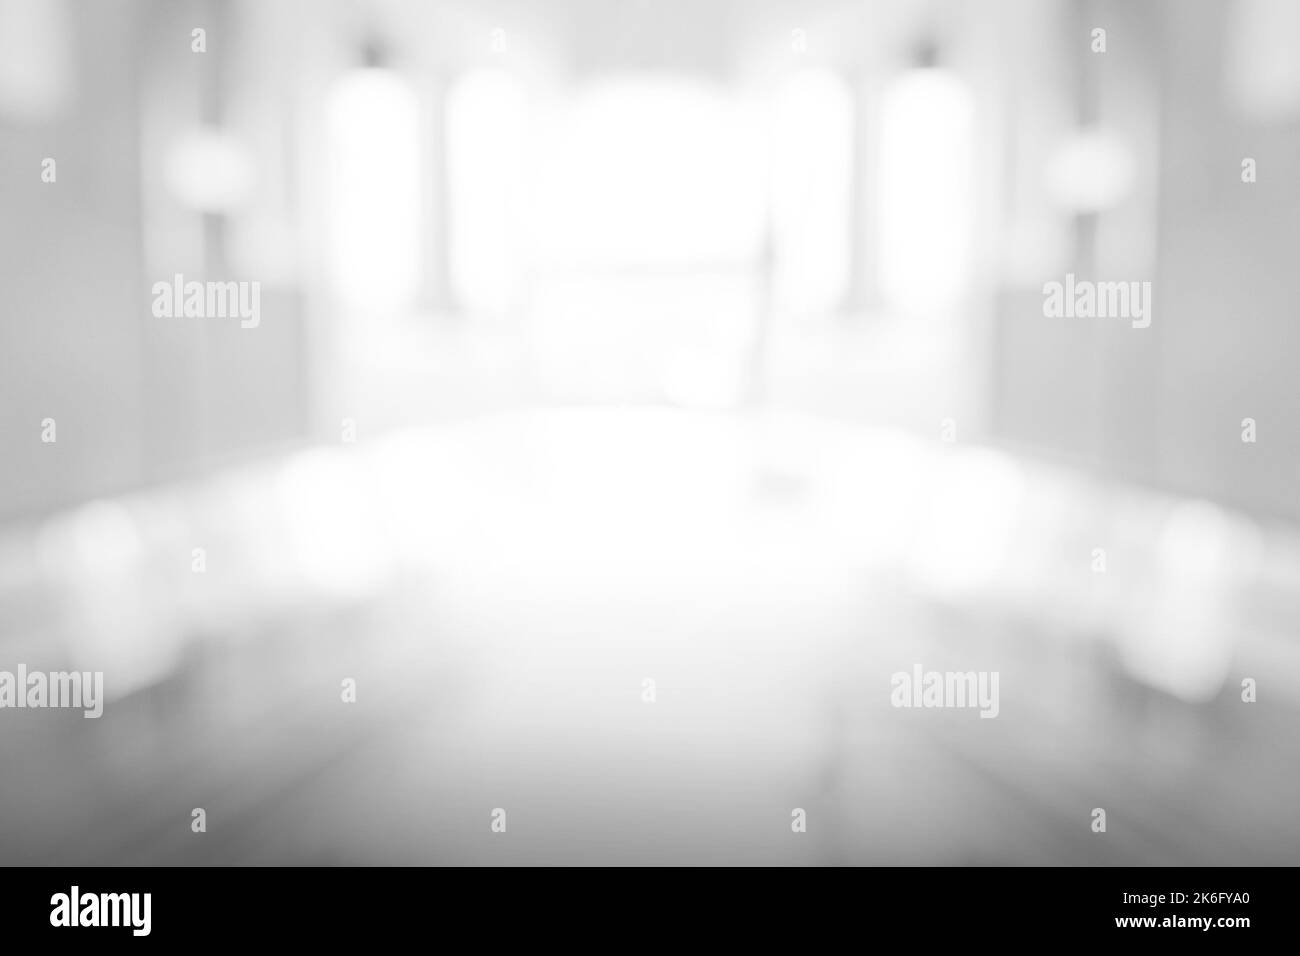 Abstract black and white bokeh blurred background for backdrop banner design Stock Photo